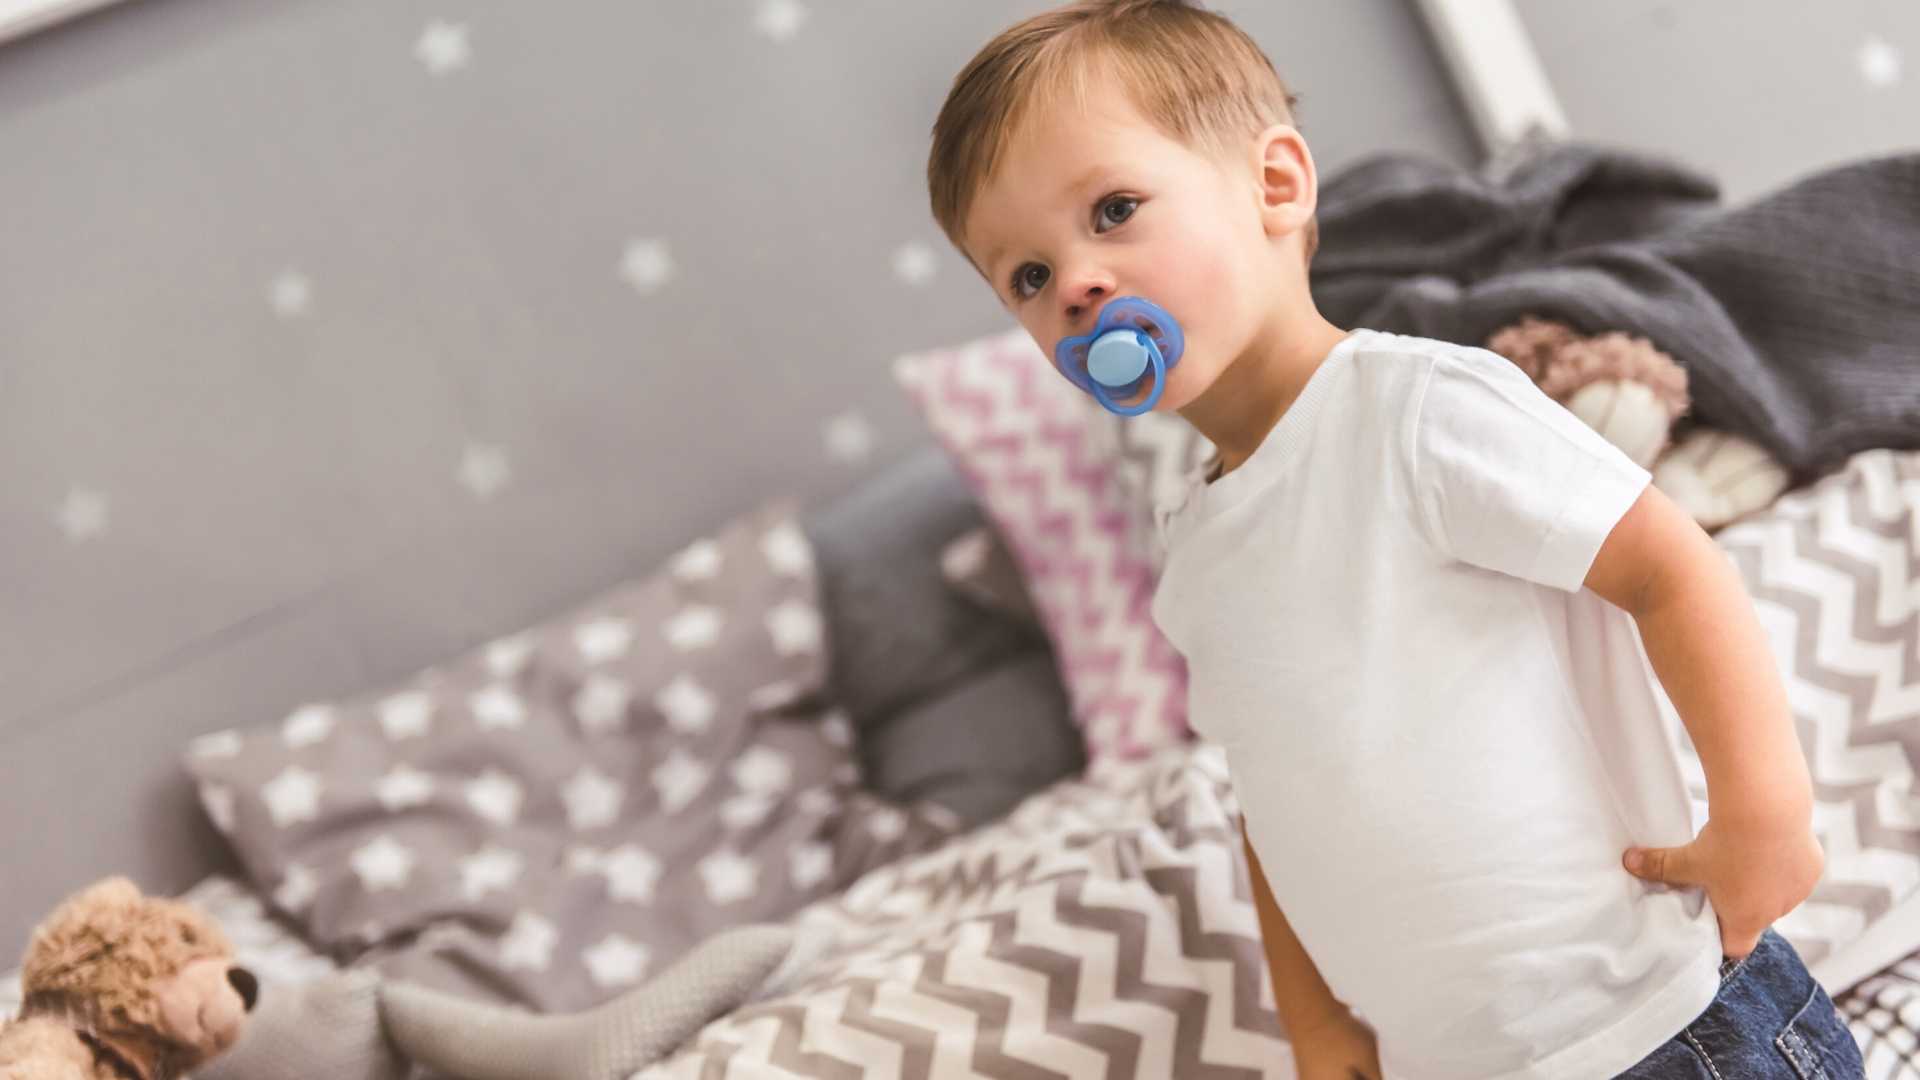 How Do You Know When To Stop Pacifier Use?